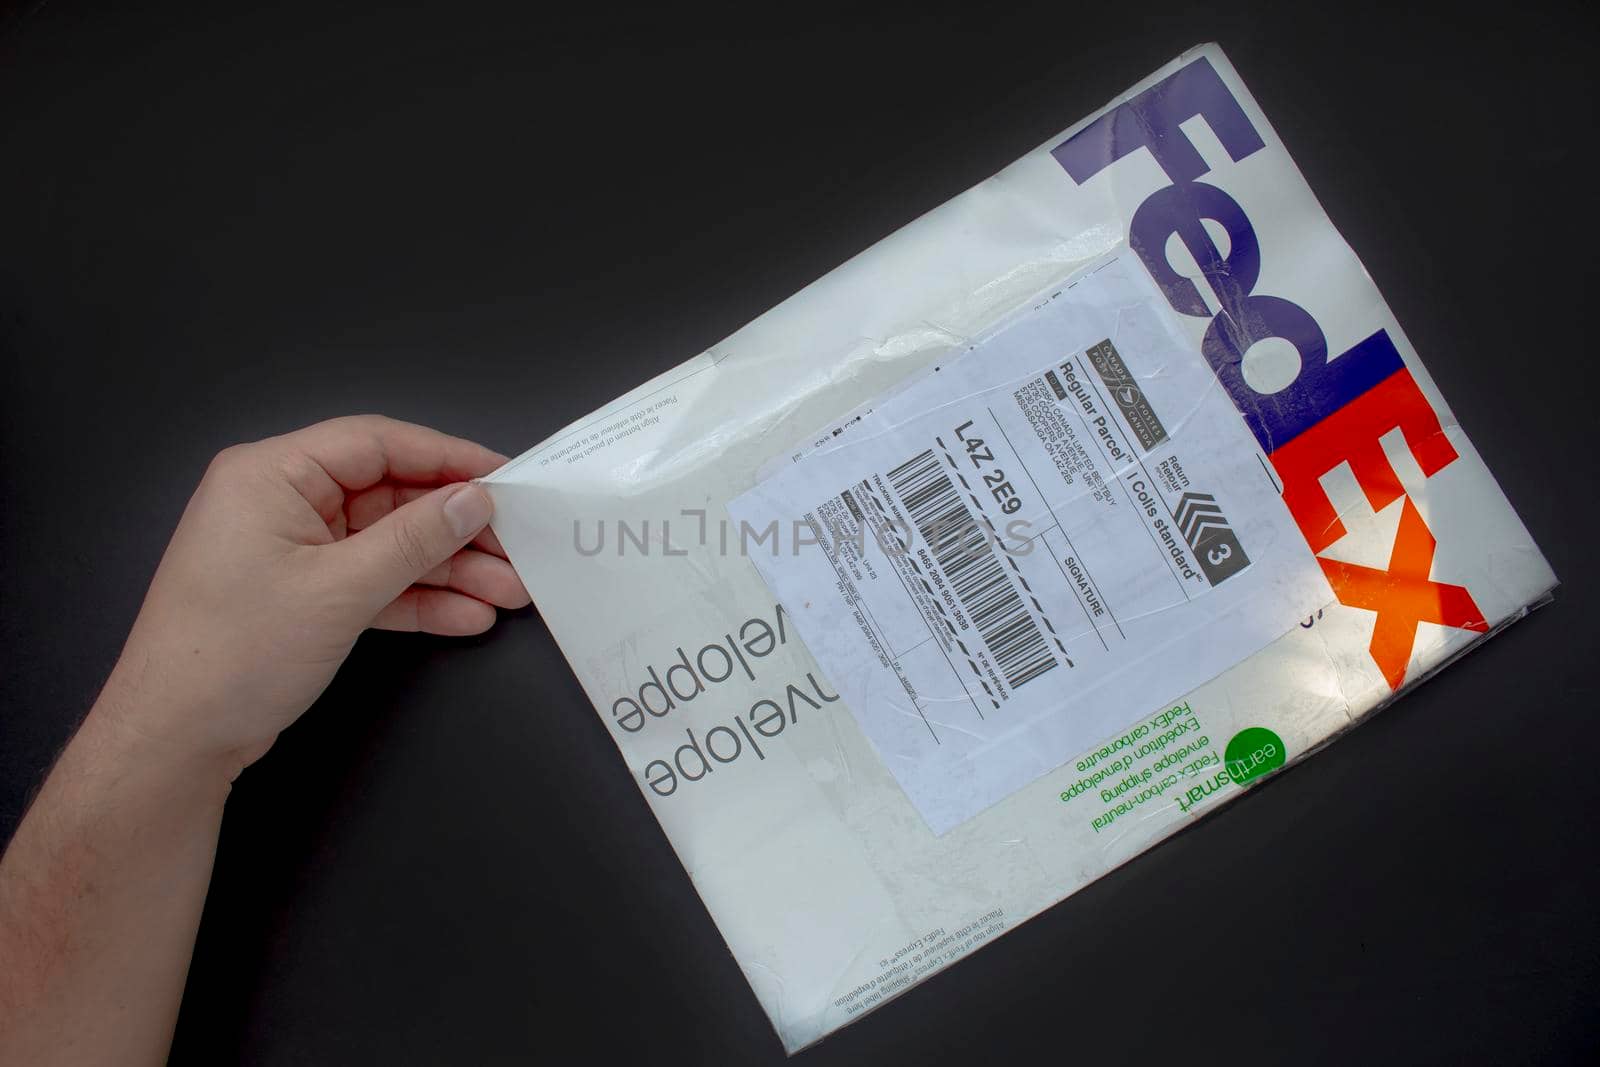 Calgary Alberta, Canada. Oct 17, 2020. A person with a Fedex package. Concept: shipping packages